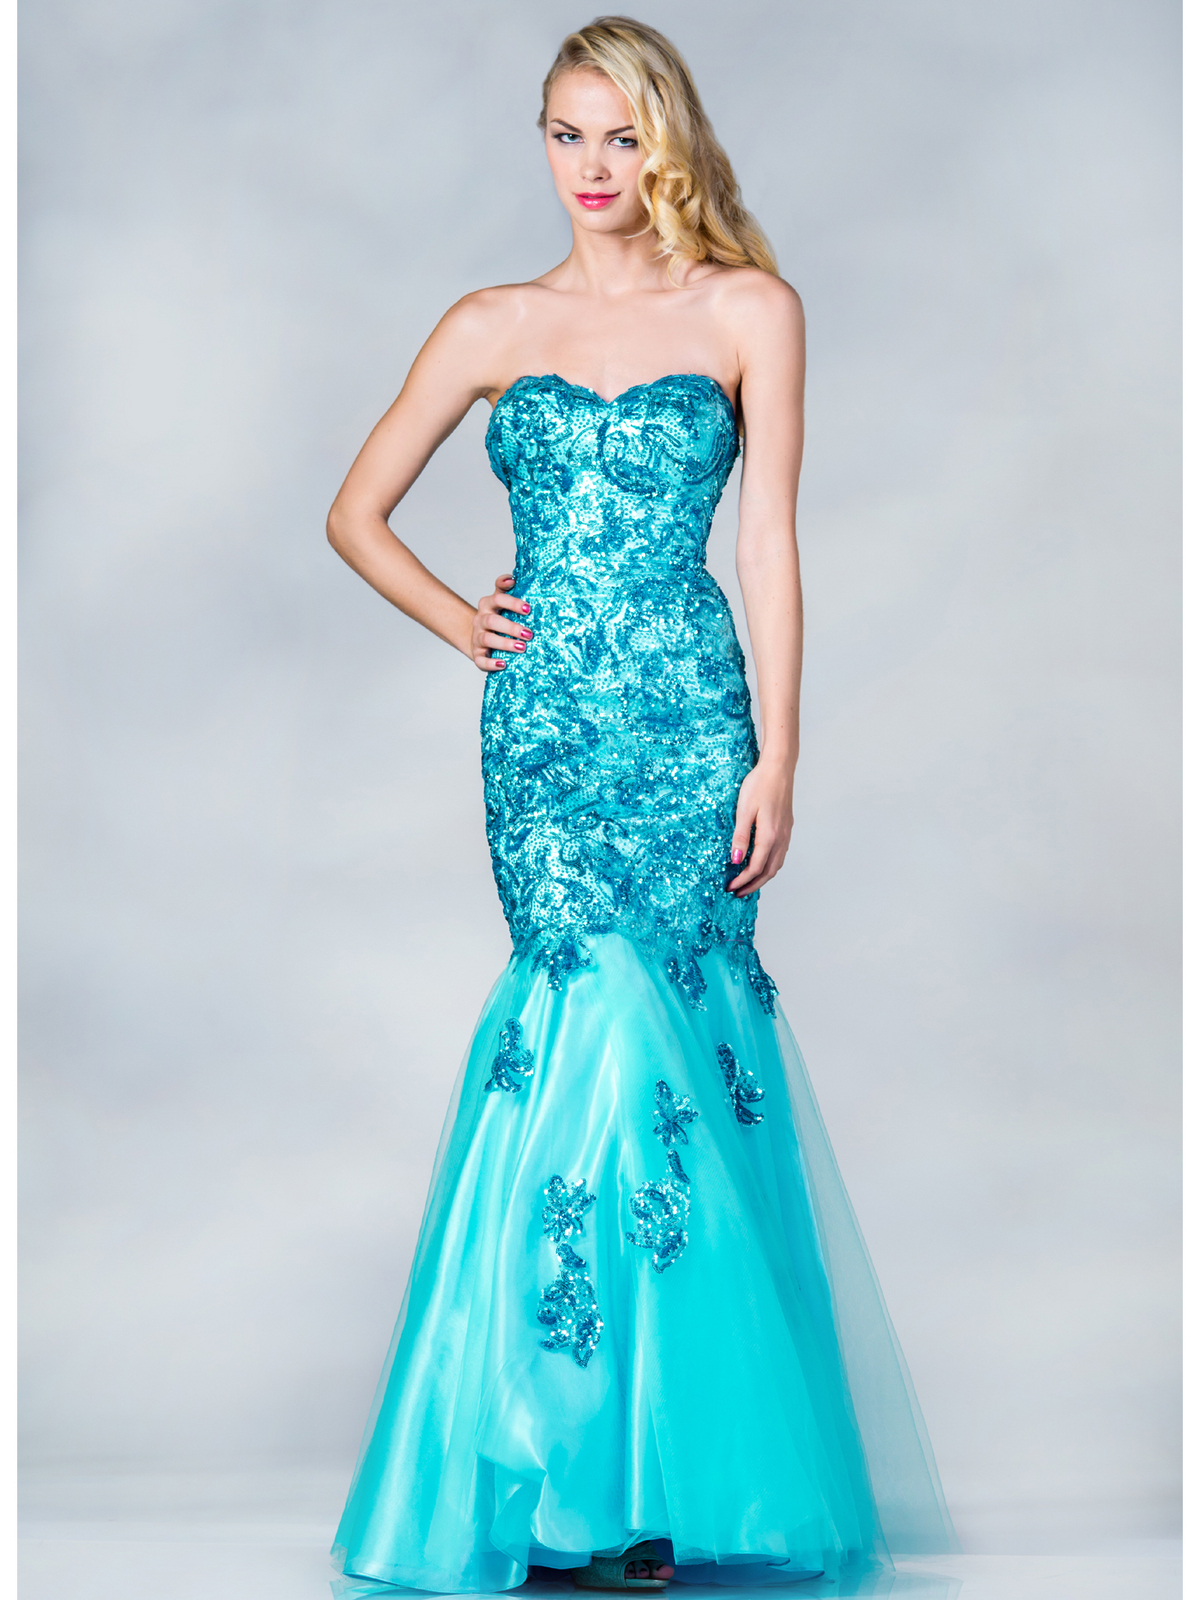 Sequin Prom Dresses Picture Collection | Dressed Up Girl